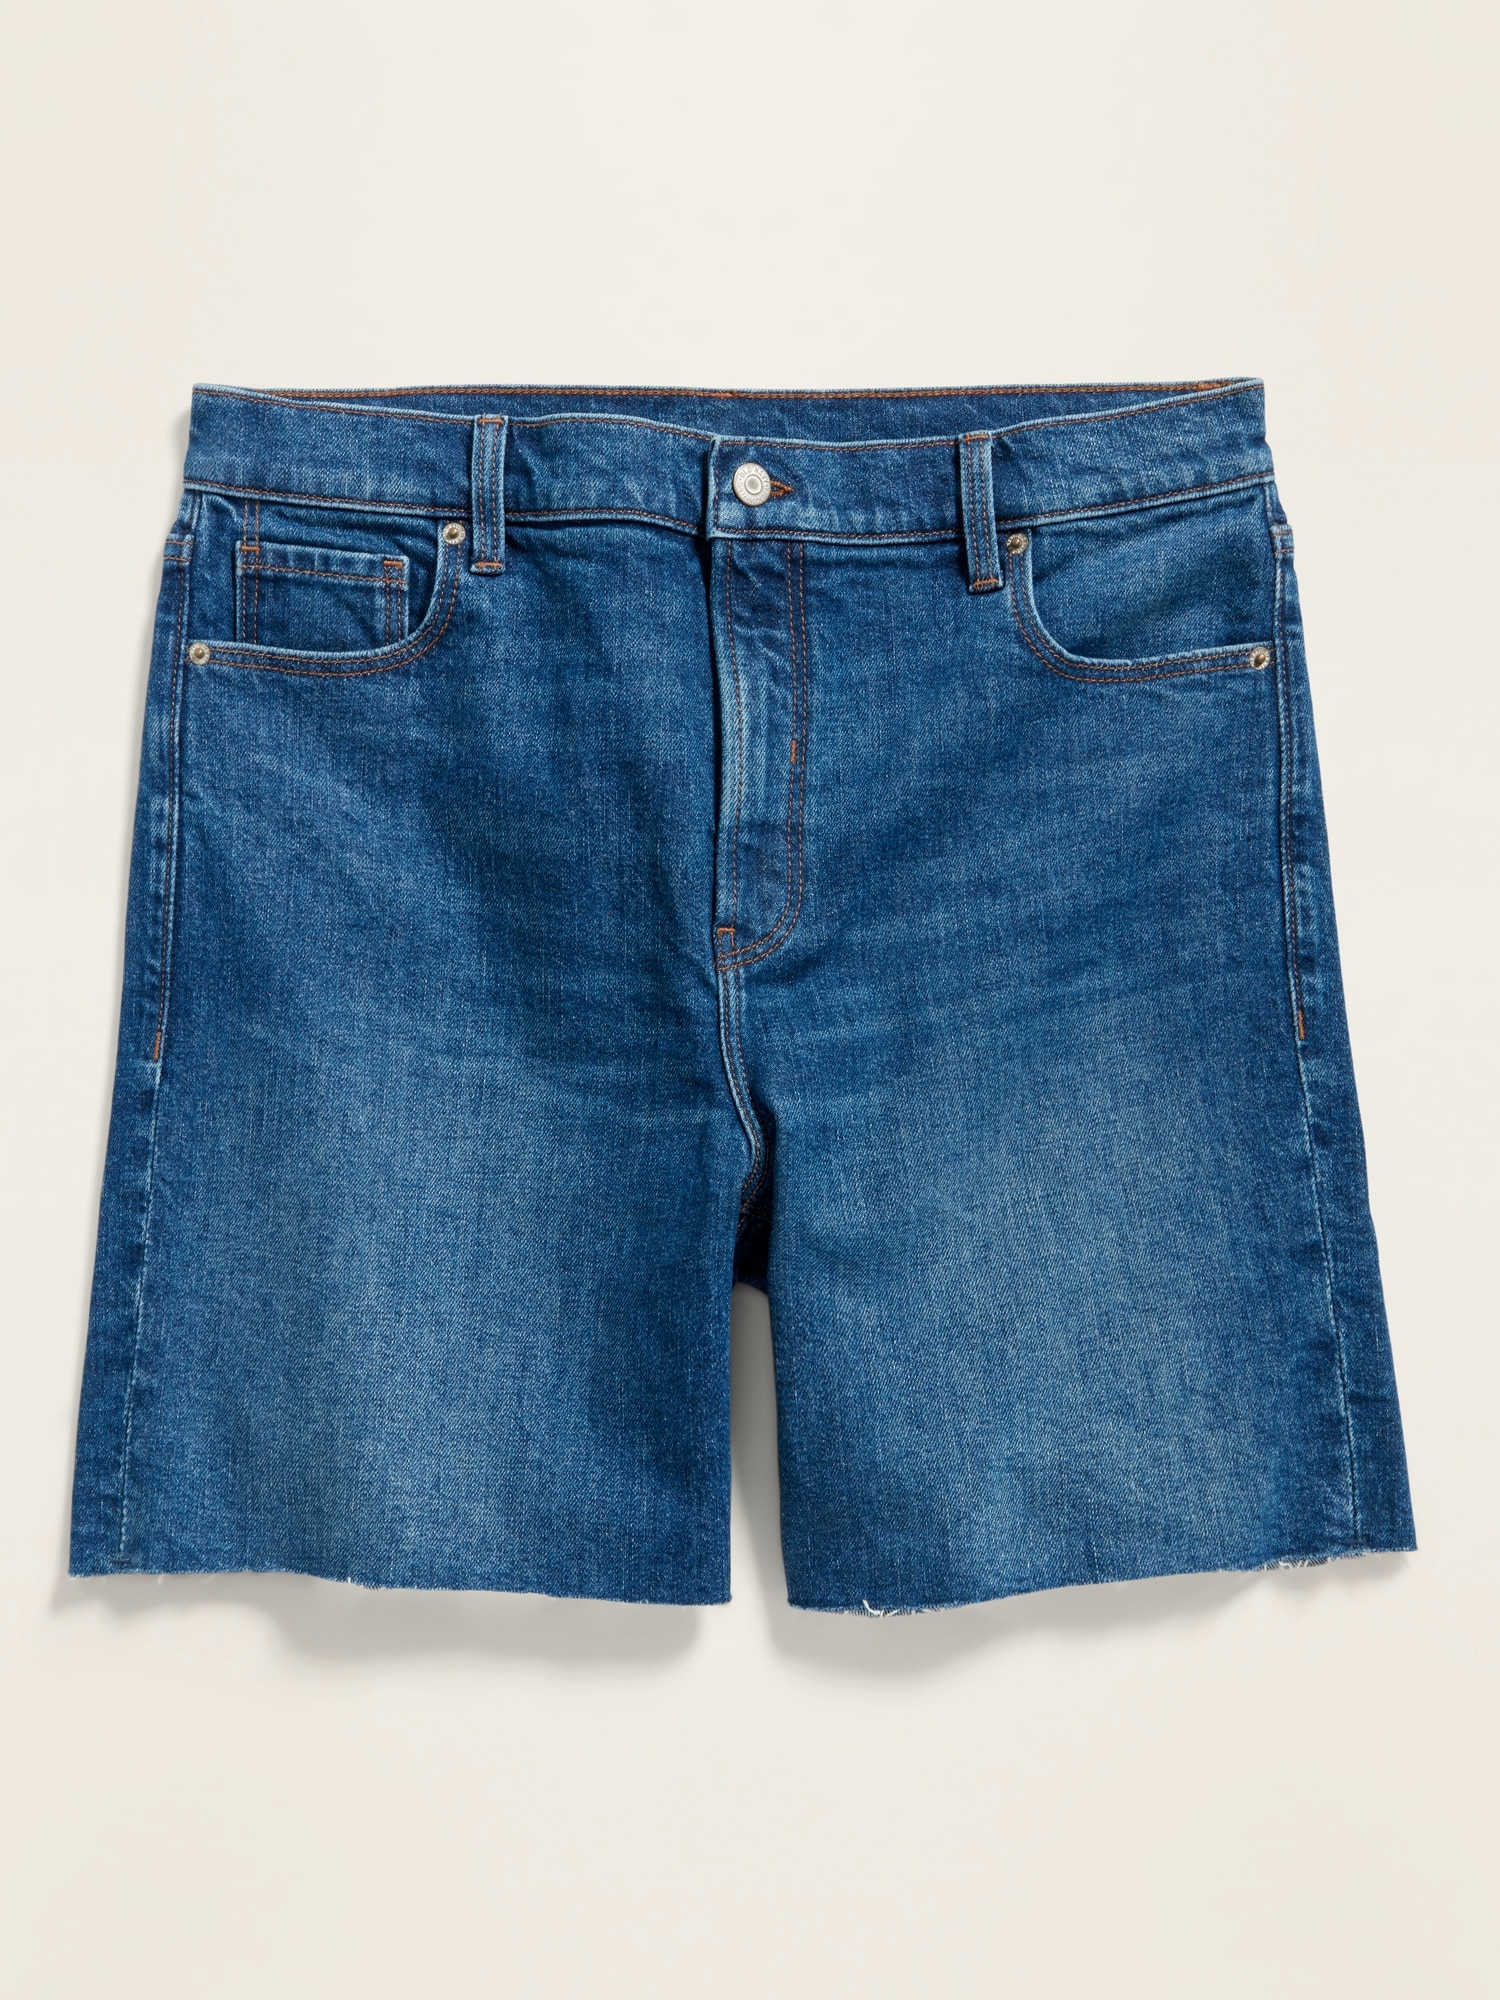 old navy high waisted jean shorts